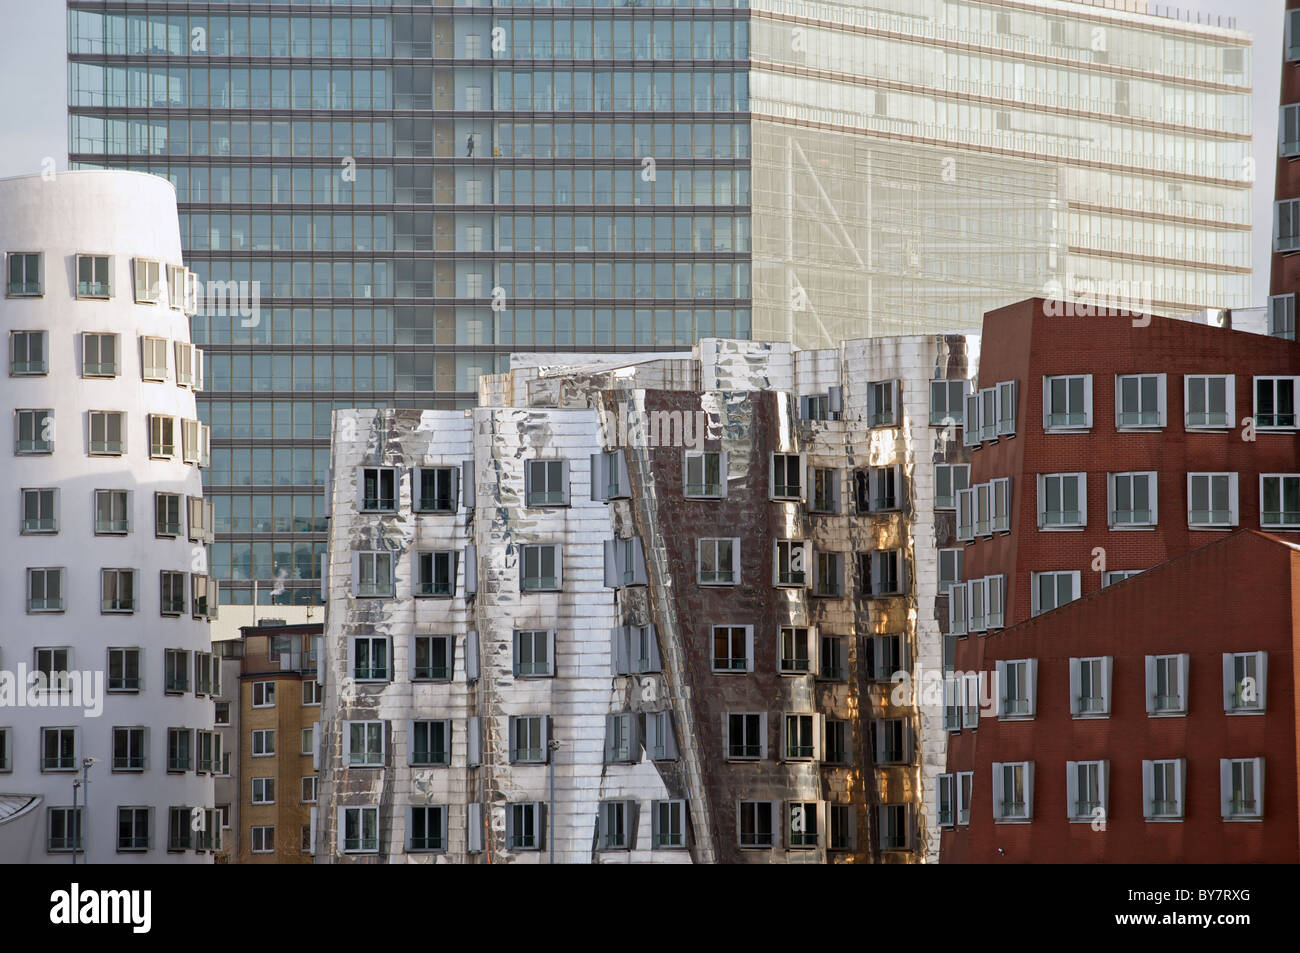 Gehry-Bauten buildings with City Gate office building in background, Medienhafen, Dusseldorf, Germany. Stock Photo